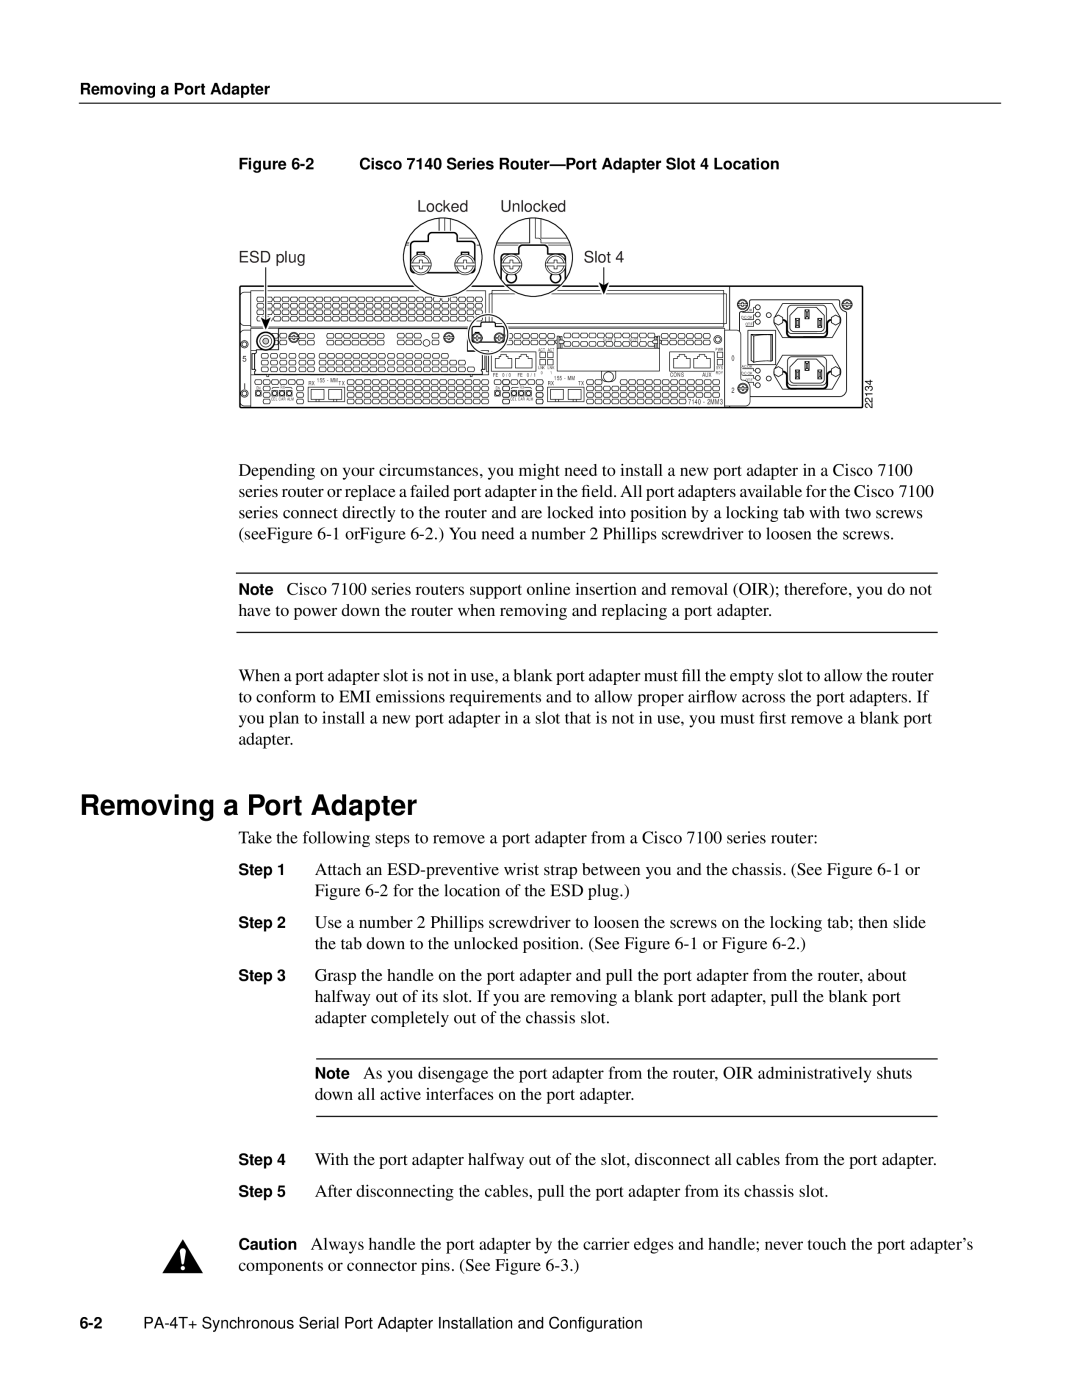 Cisco Systems PA-4T manual Removing a Port Adapter, 2 Cisco 7140 Series Router-Port Adapter Slot 4 Location 